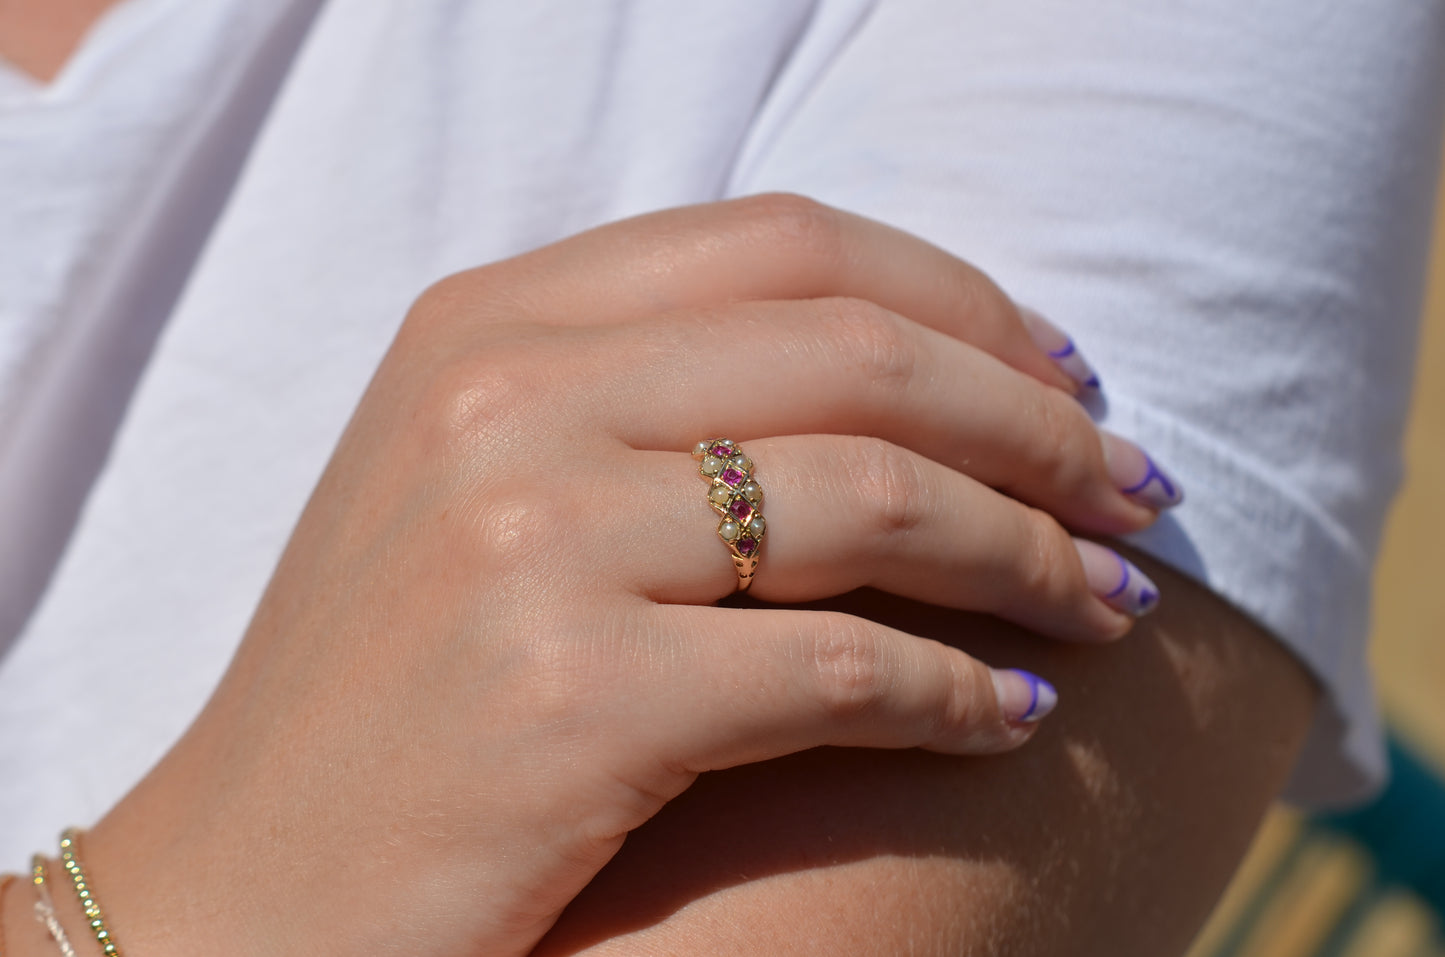 Chic Antique Pearl and Ruby Checkerboard Ring